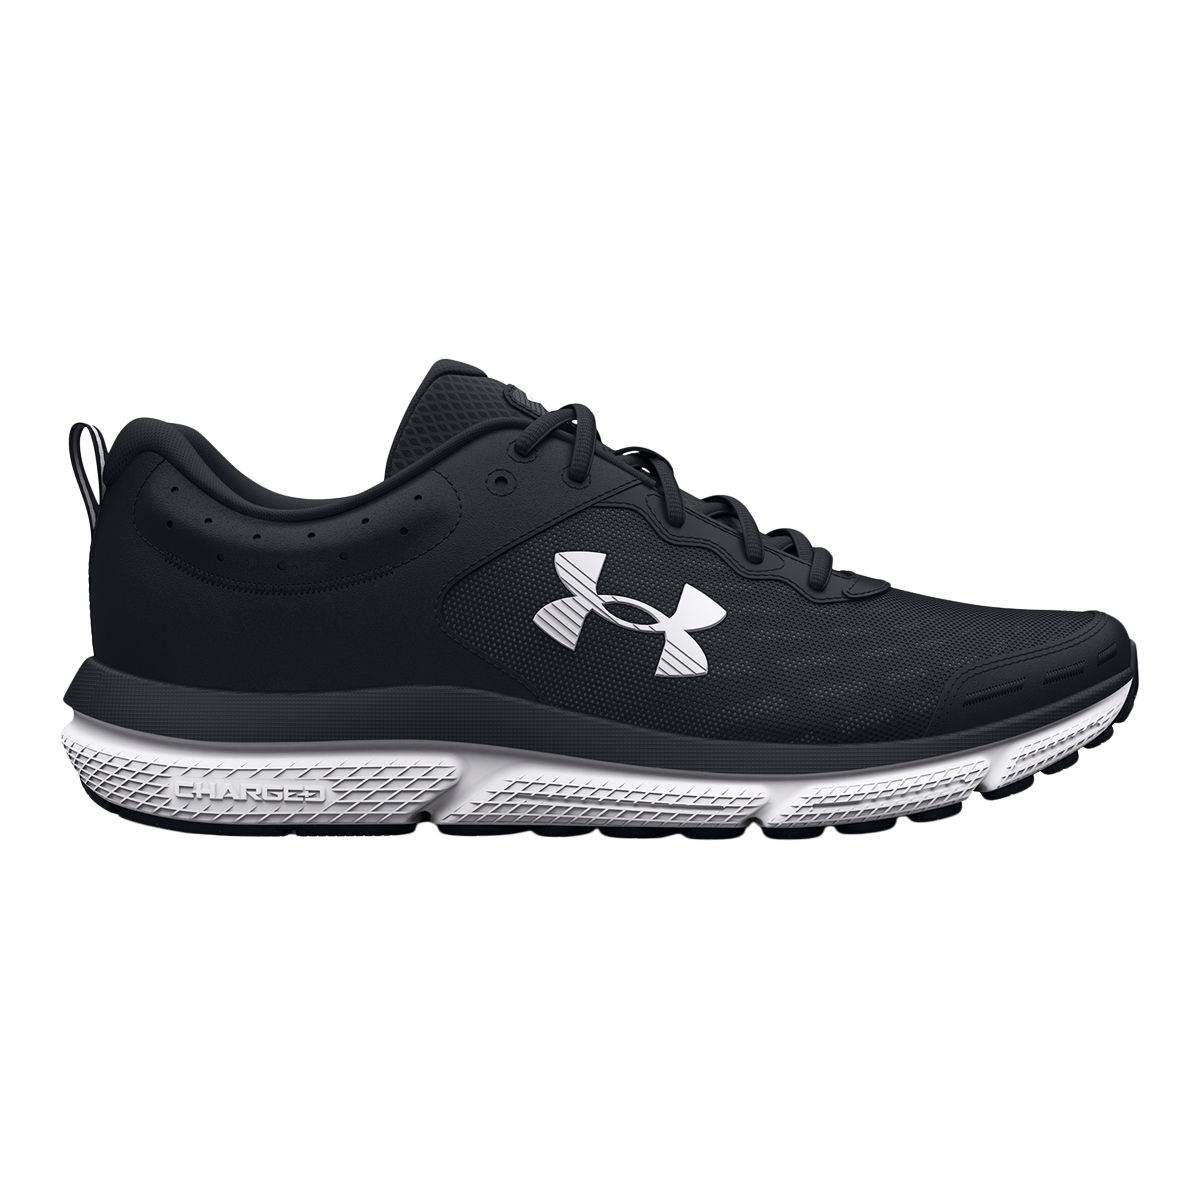 Under Armour Women's Charged Assert 10 Training Shoes